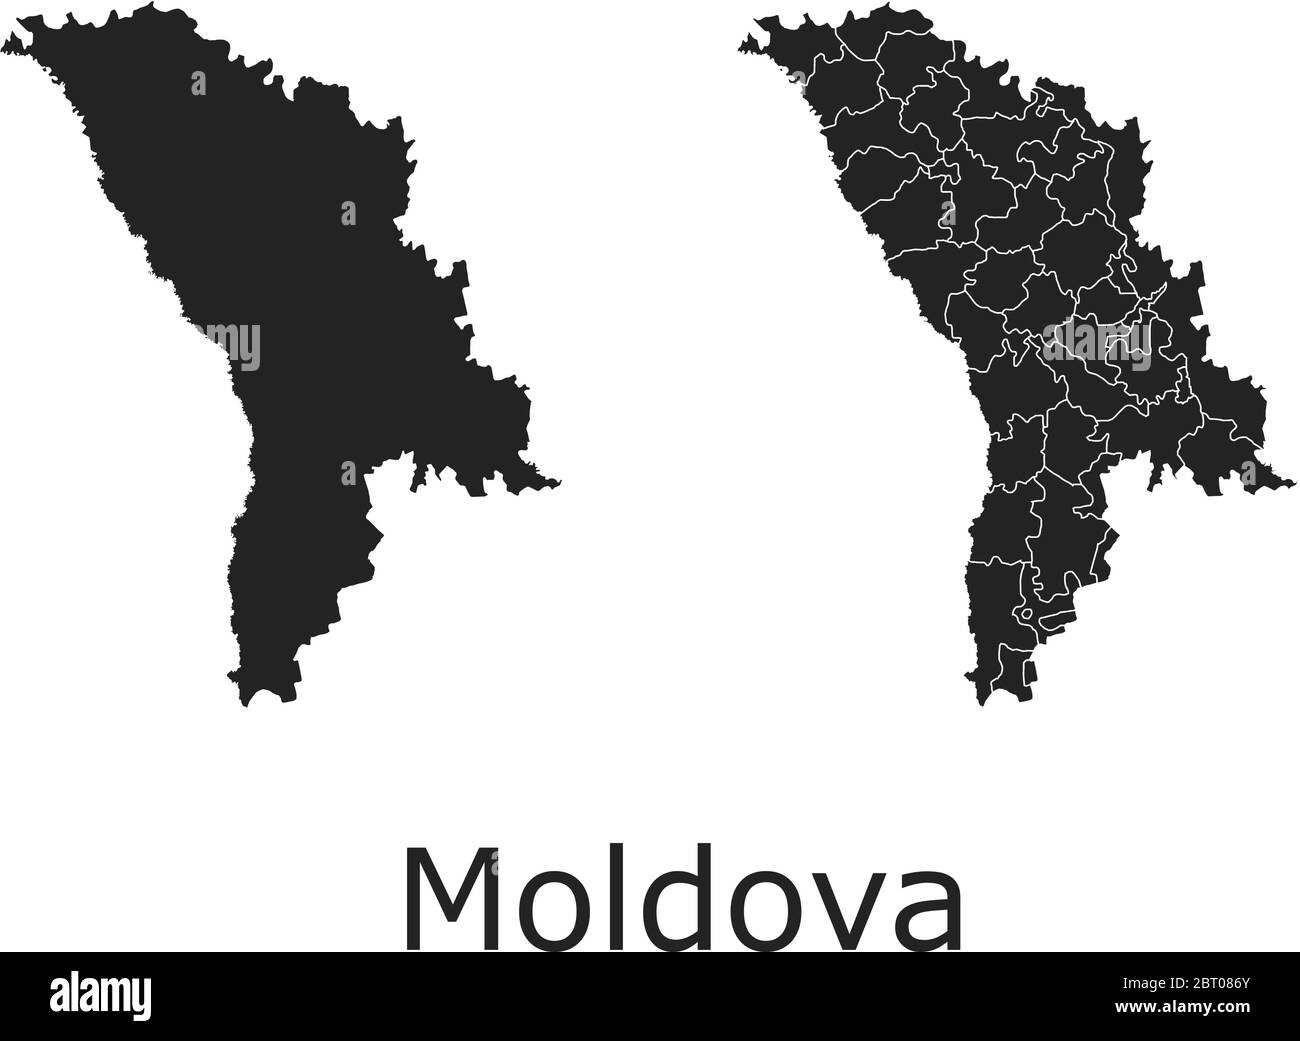 Moldova vector maps with administrative regions, municipalities, departments, borders Stock Vector